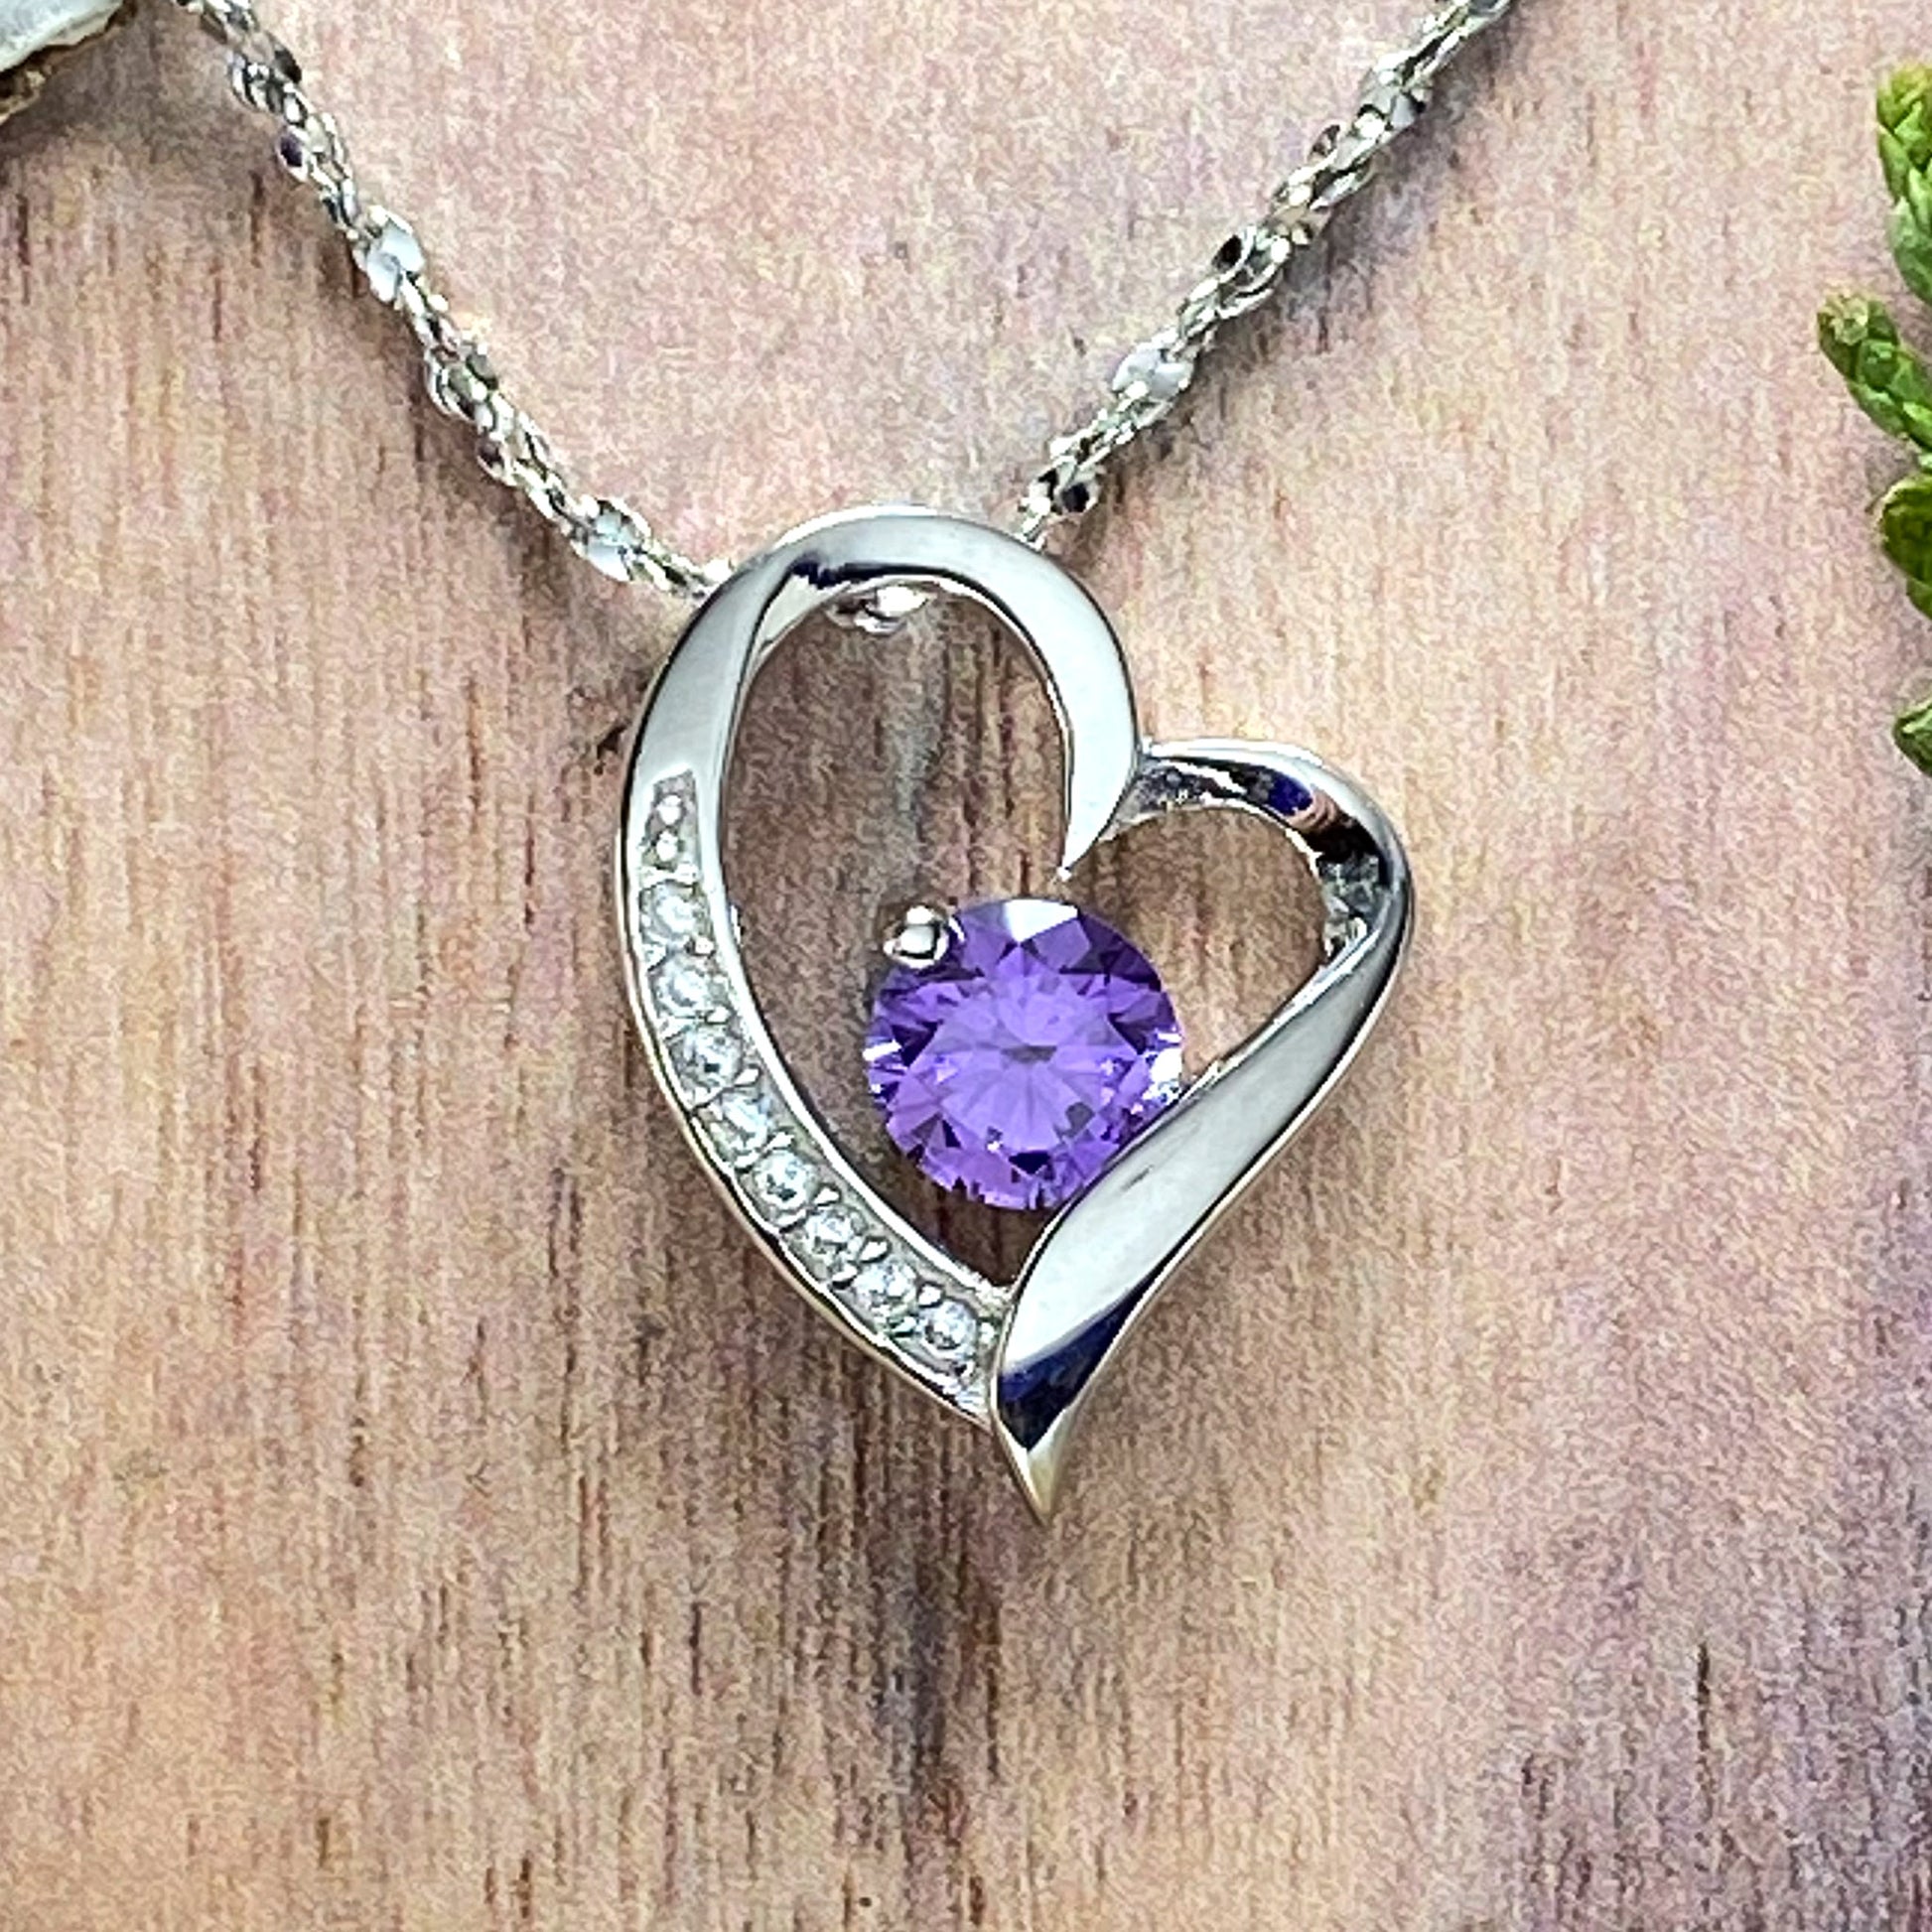 Sterling Silver Heart Pendant with Babysbreath Chain Front View - Stone Treasures by the Lake